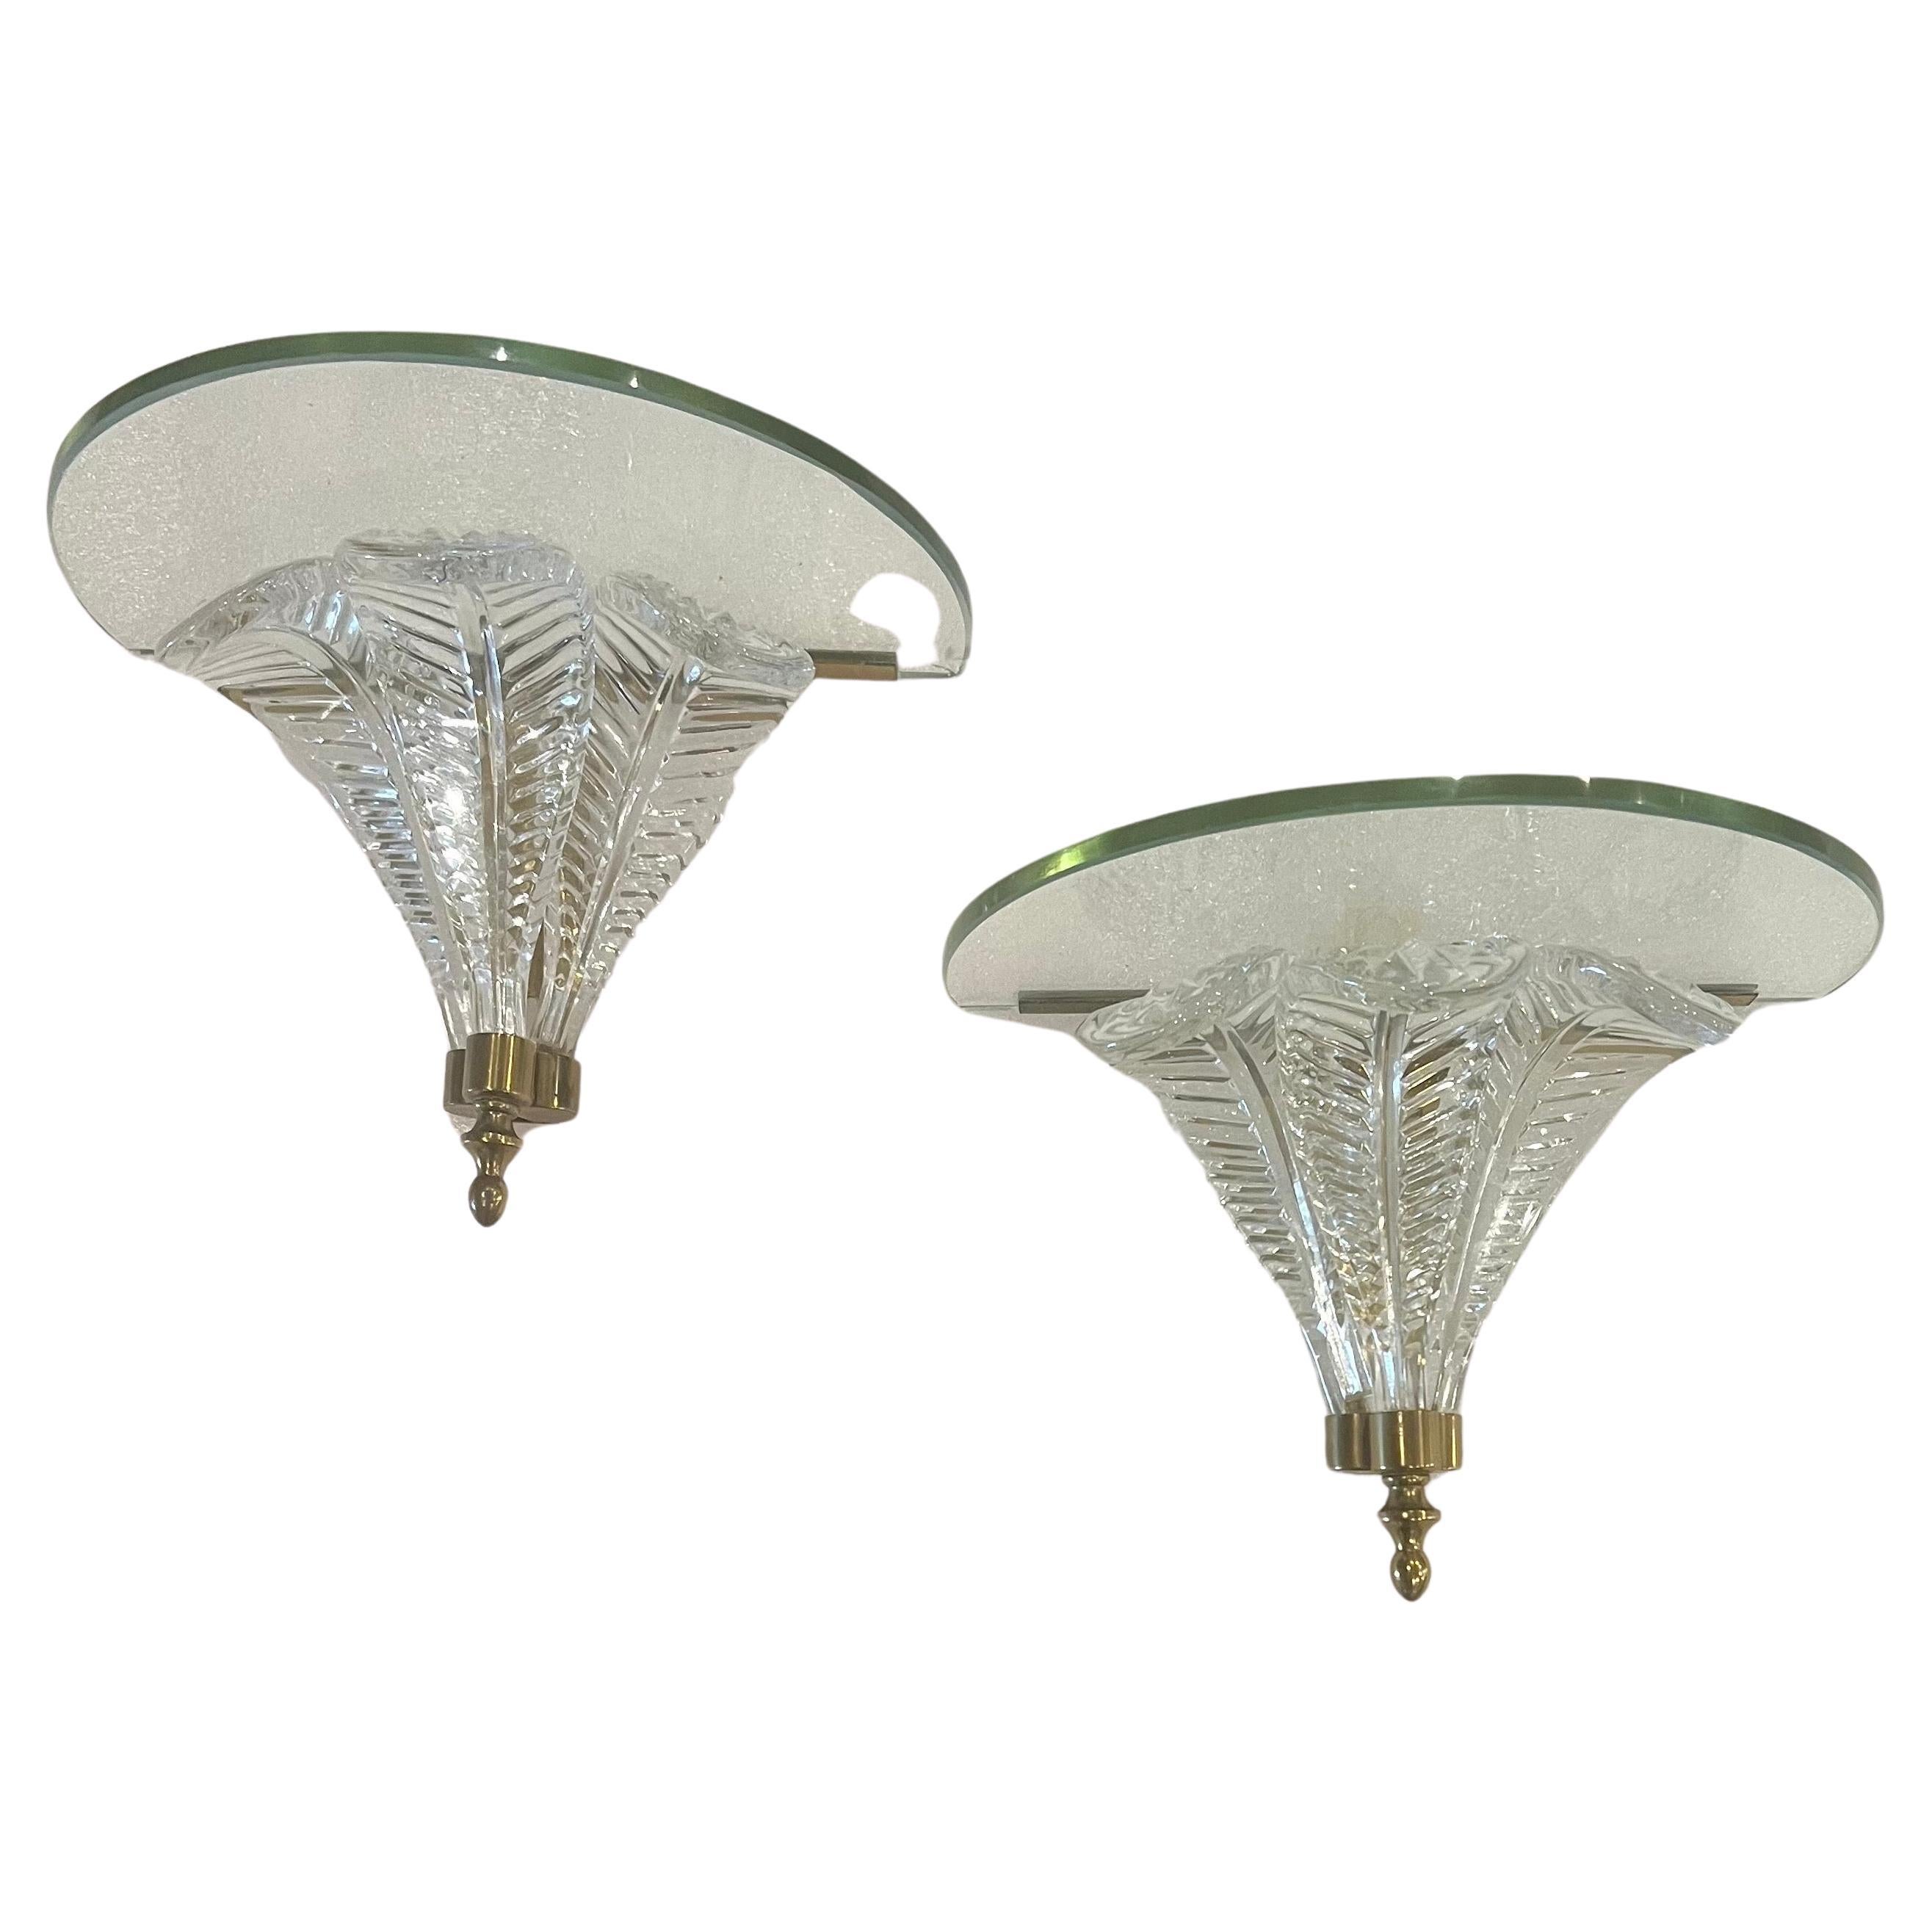 Pair of Italian Murano Wall Sconces Petite Shelves Brass & Glass In Good Condition For Sale In San Diego, CA